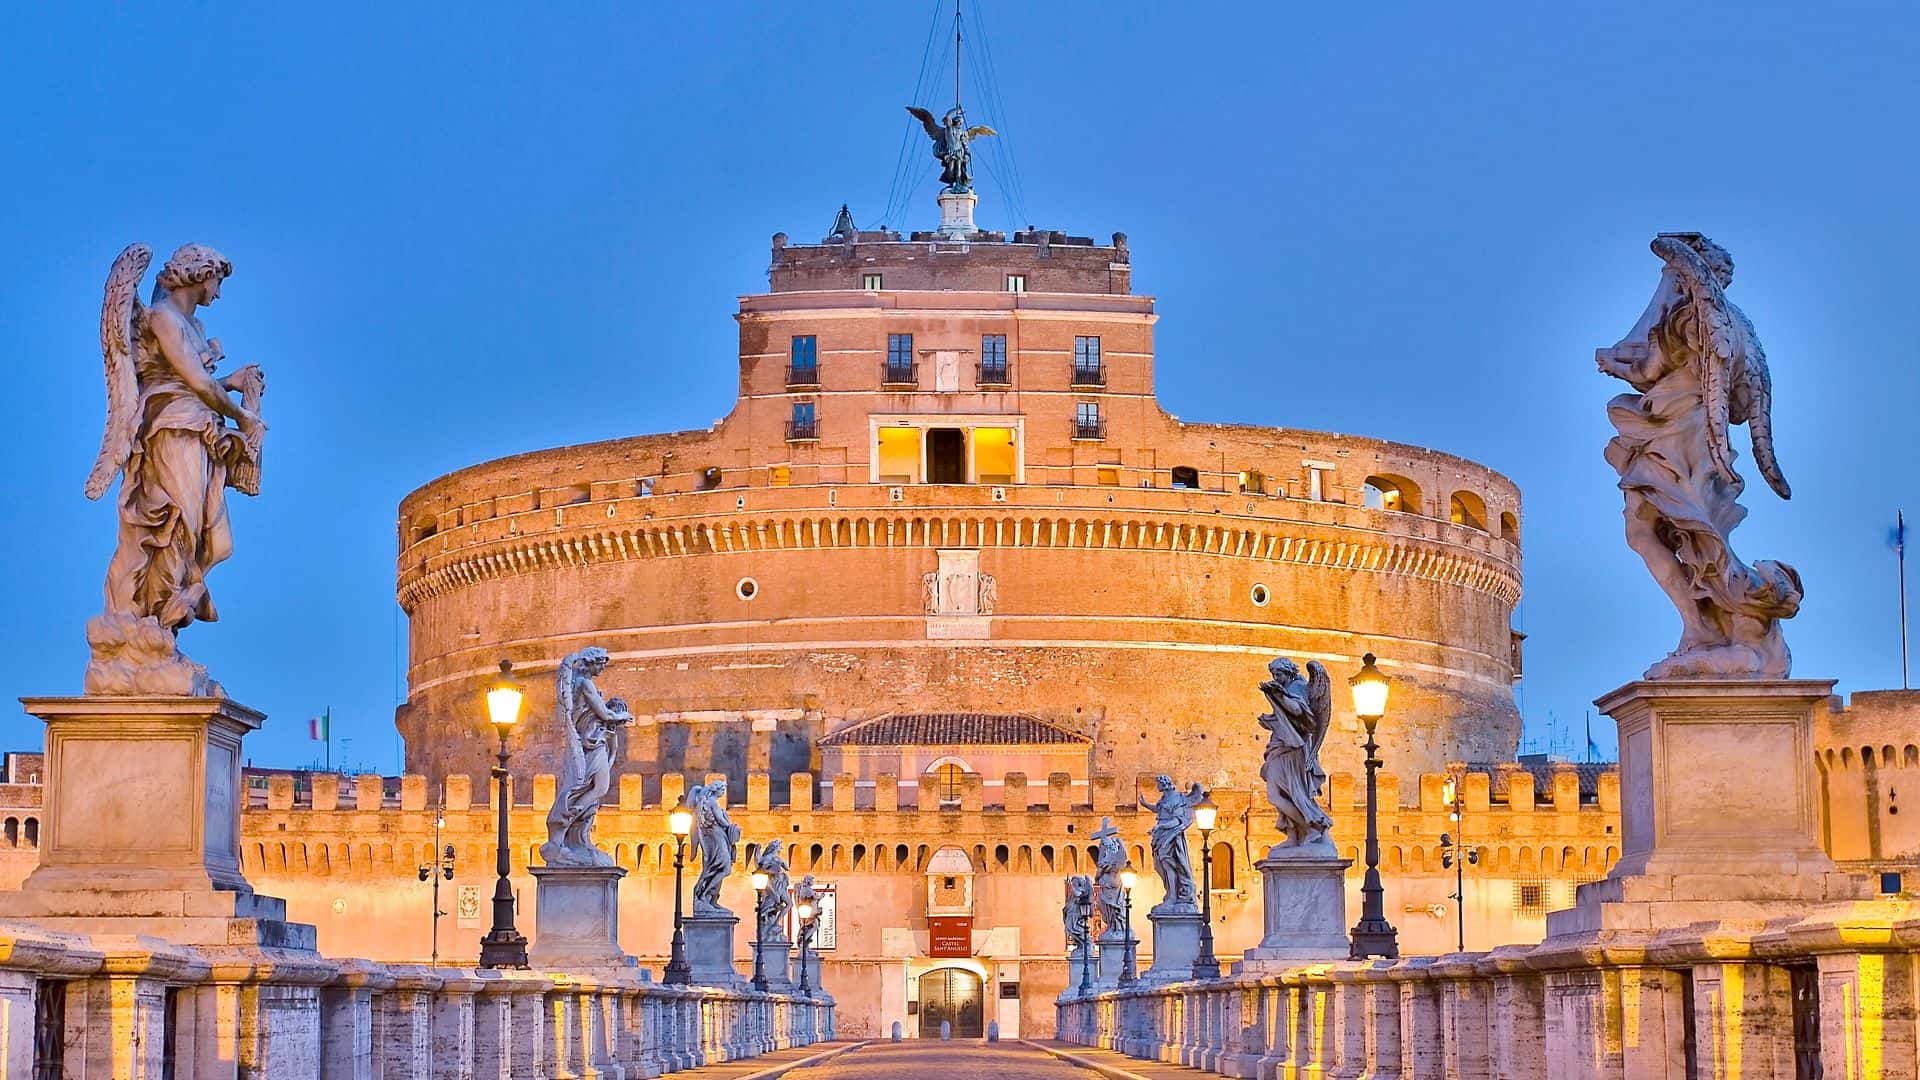 View of Castel Sant'Angelo from the bridge leading to the entrance of the castle.